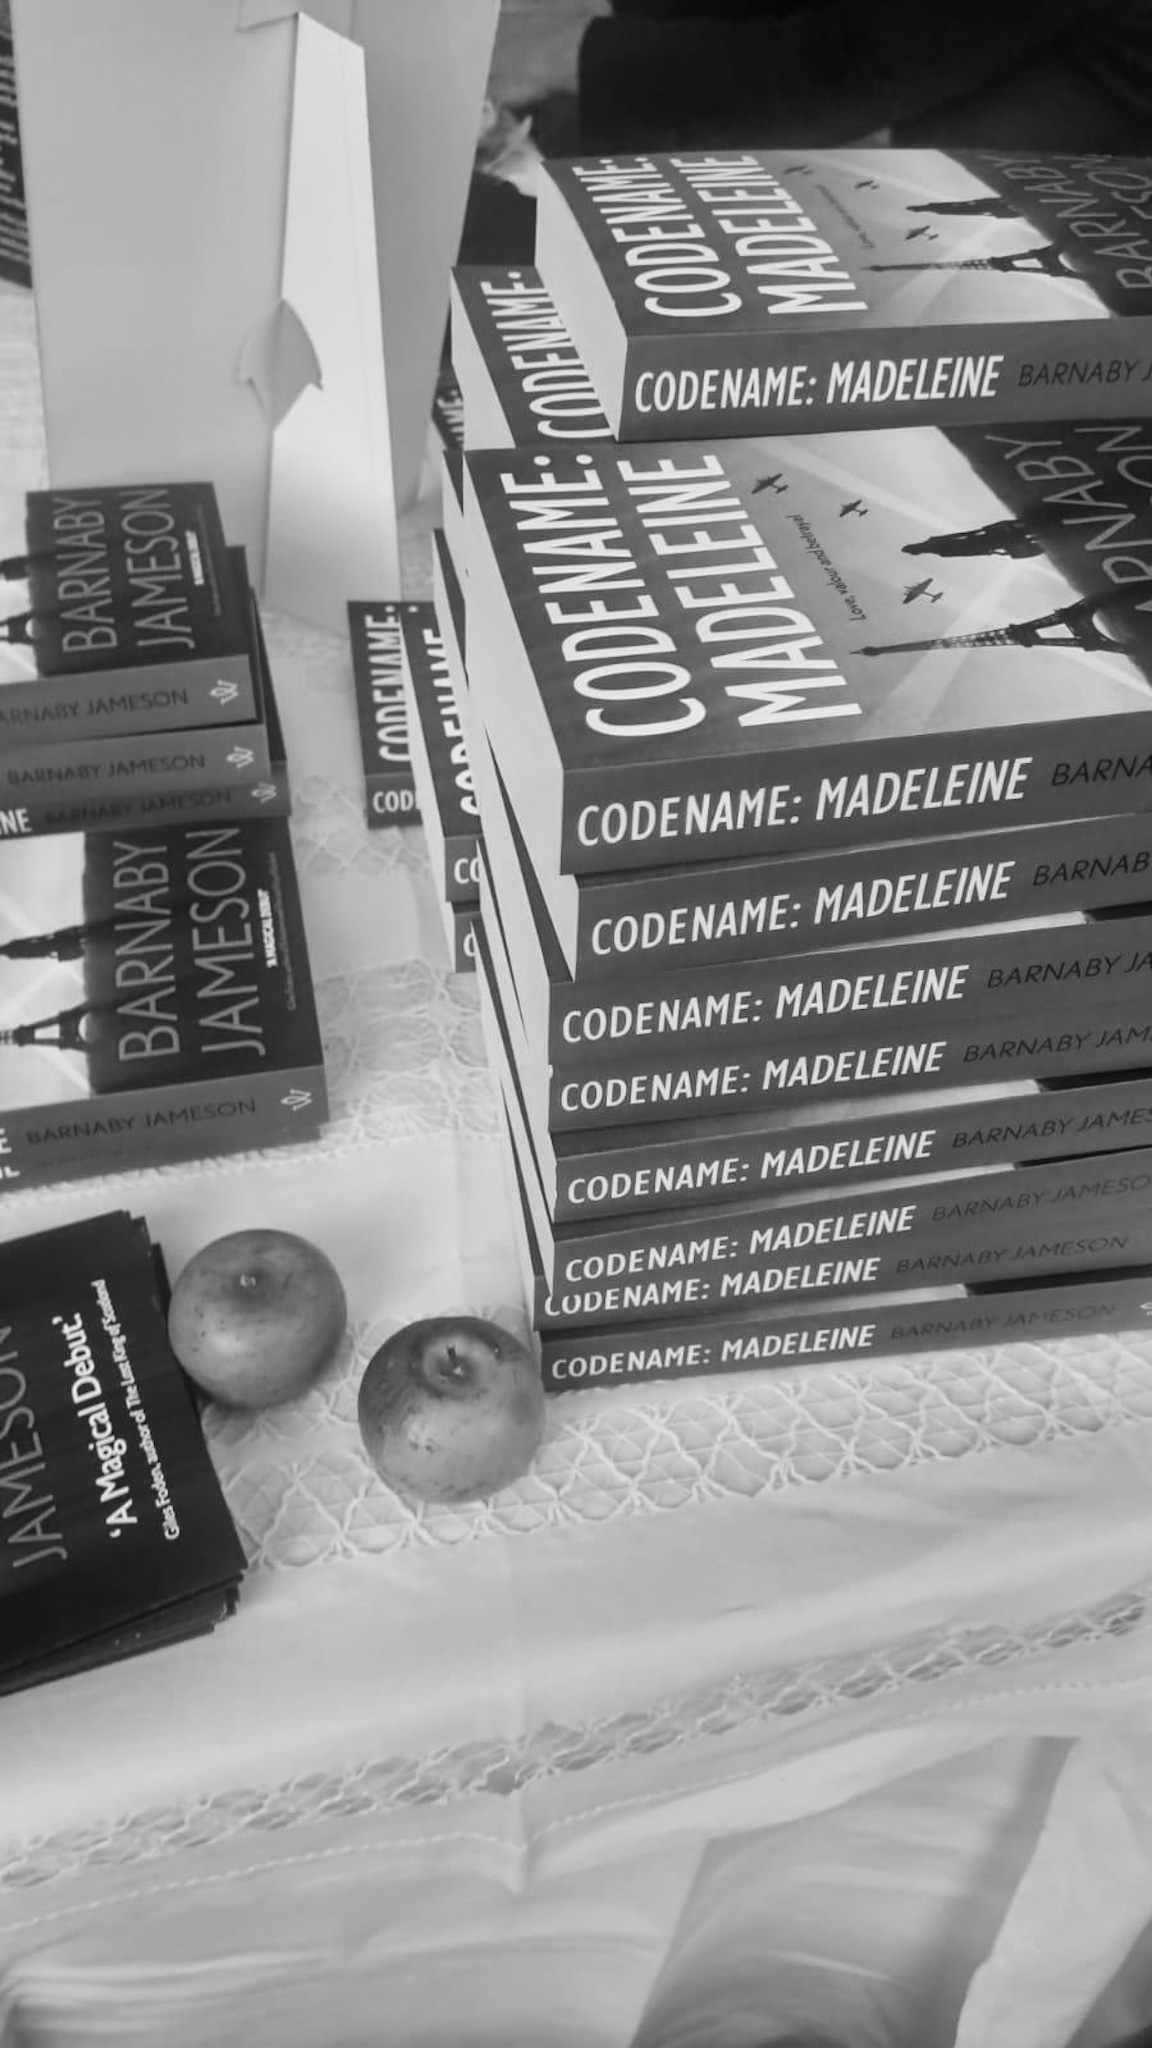 Copies of the book CODENAME: MADELEINE.